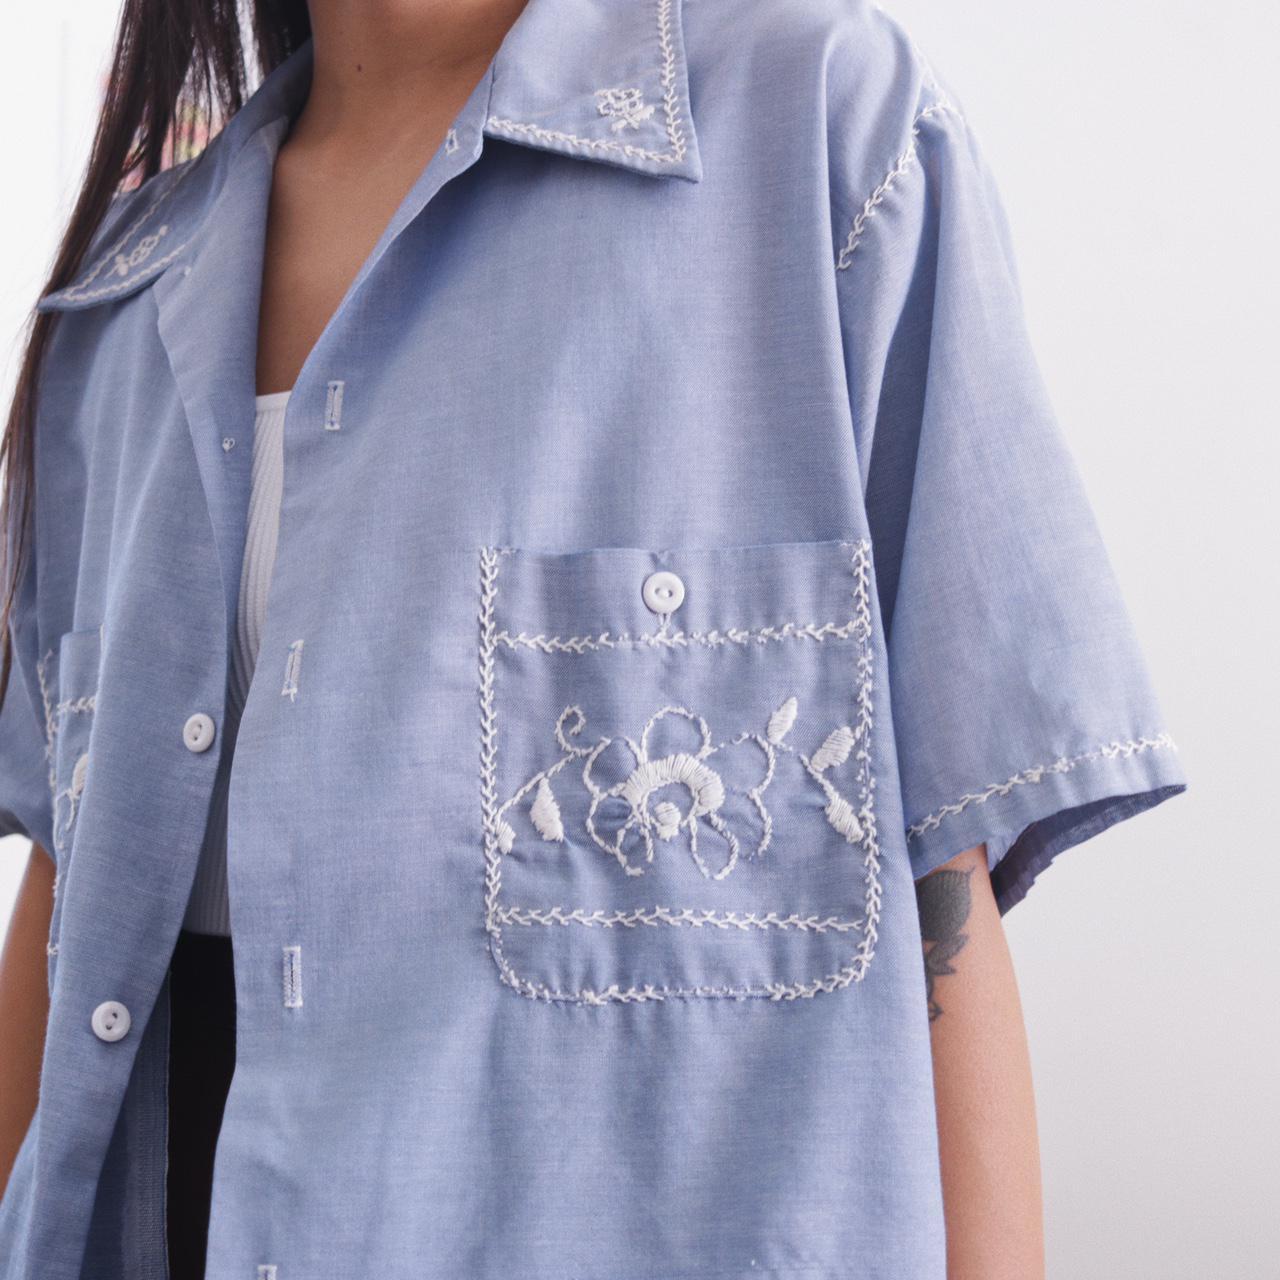 Product Image 3 - vintage 70s chambray shirt

DESCRIPTION
western style